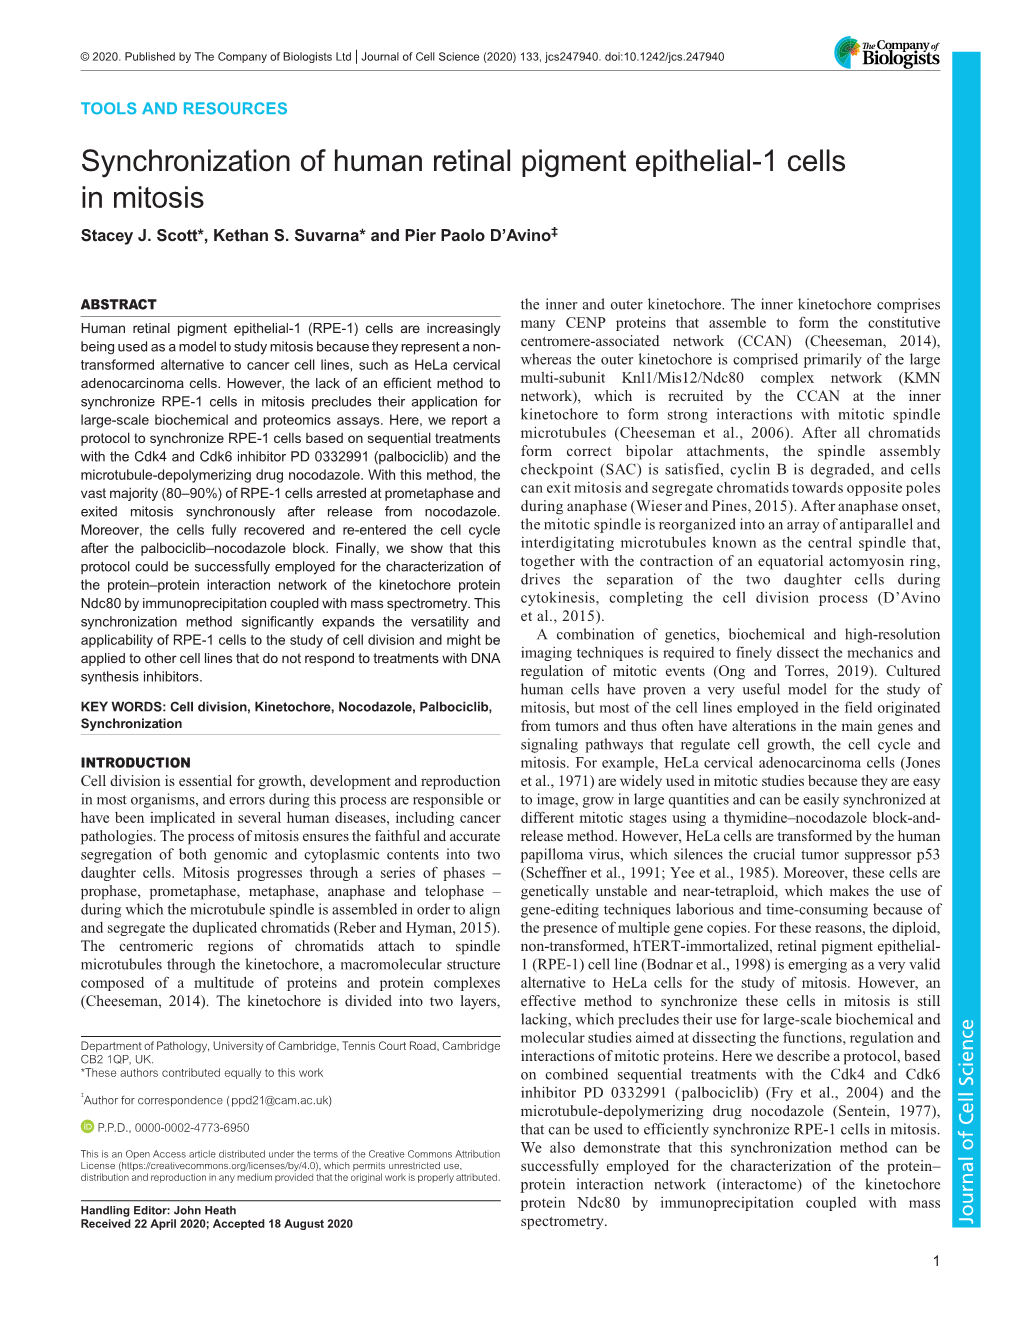 Synchronization of Human Retinal Pigment Epithelial-1 Cells in Mitosis Stacey J